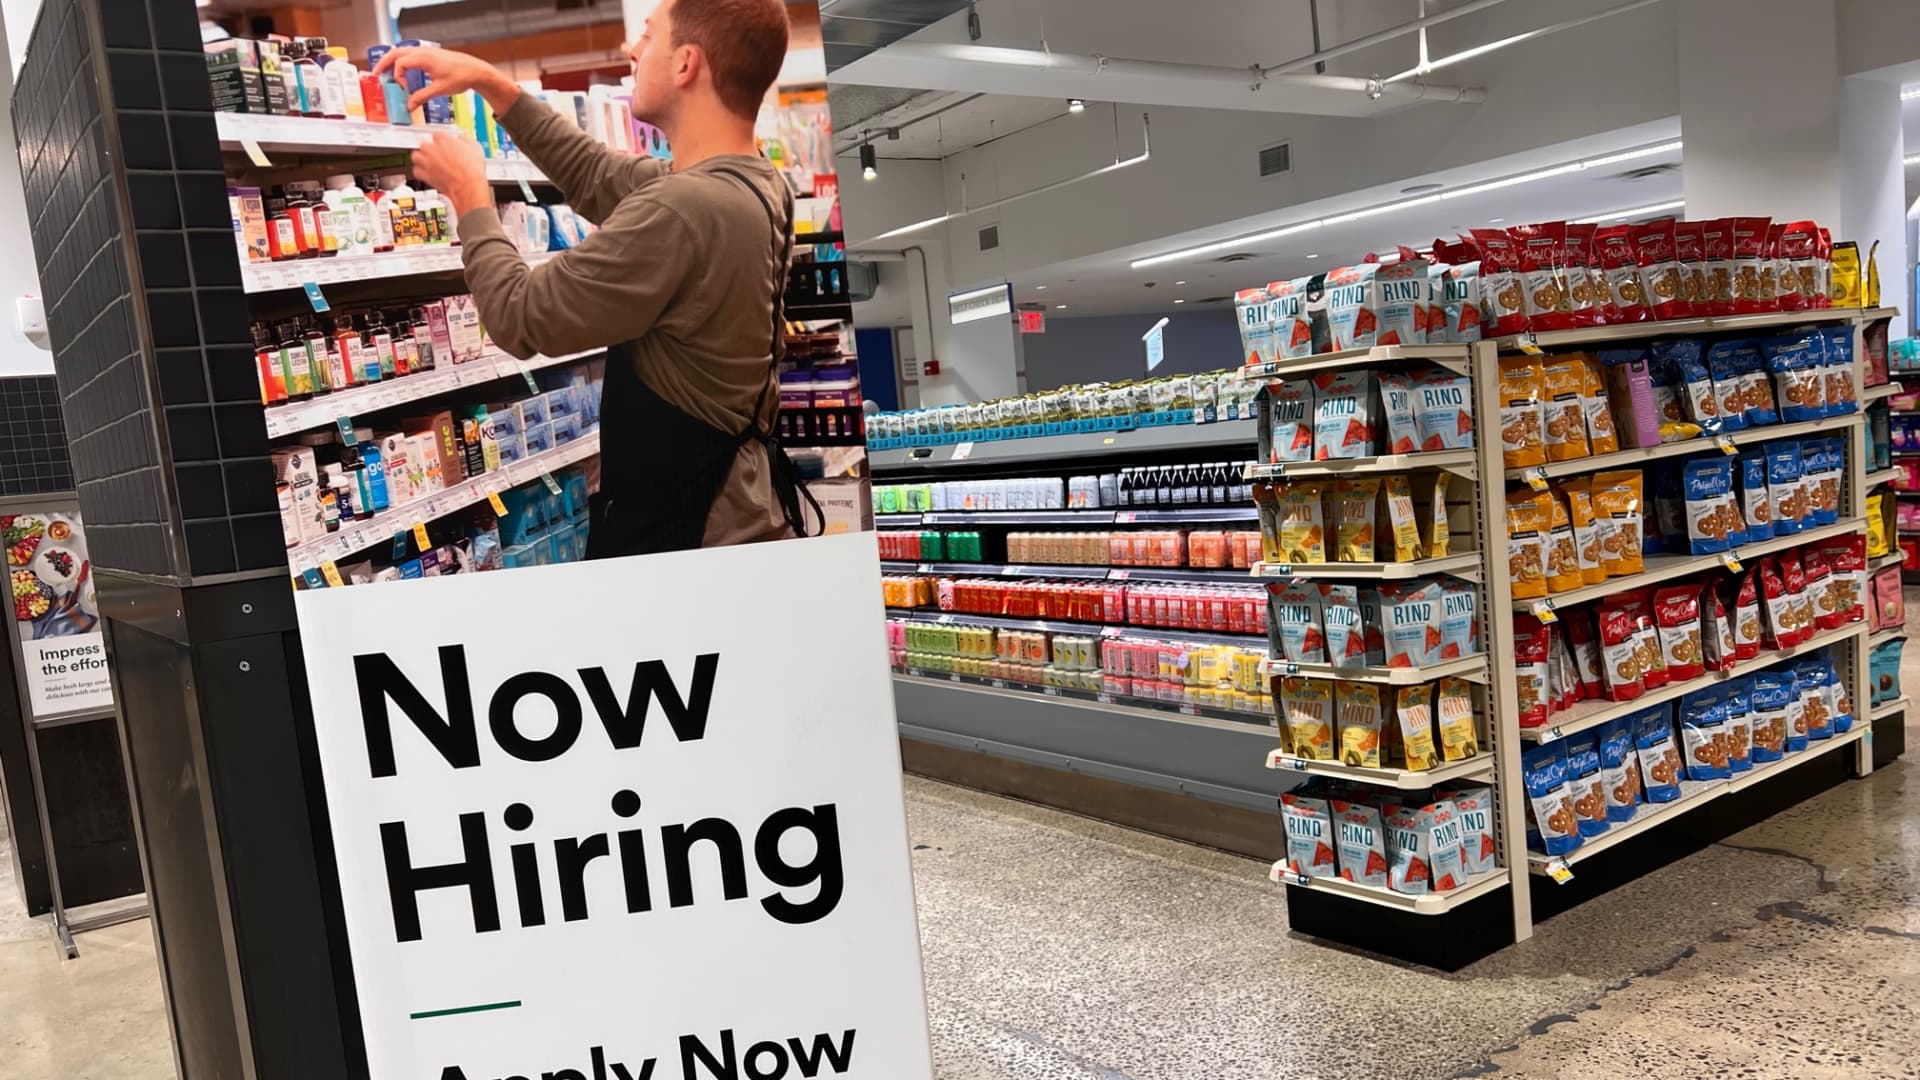 February is expected to have been a strong month for hiring and wages